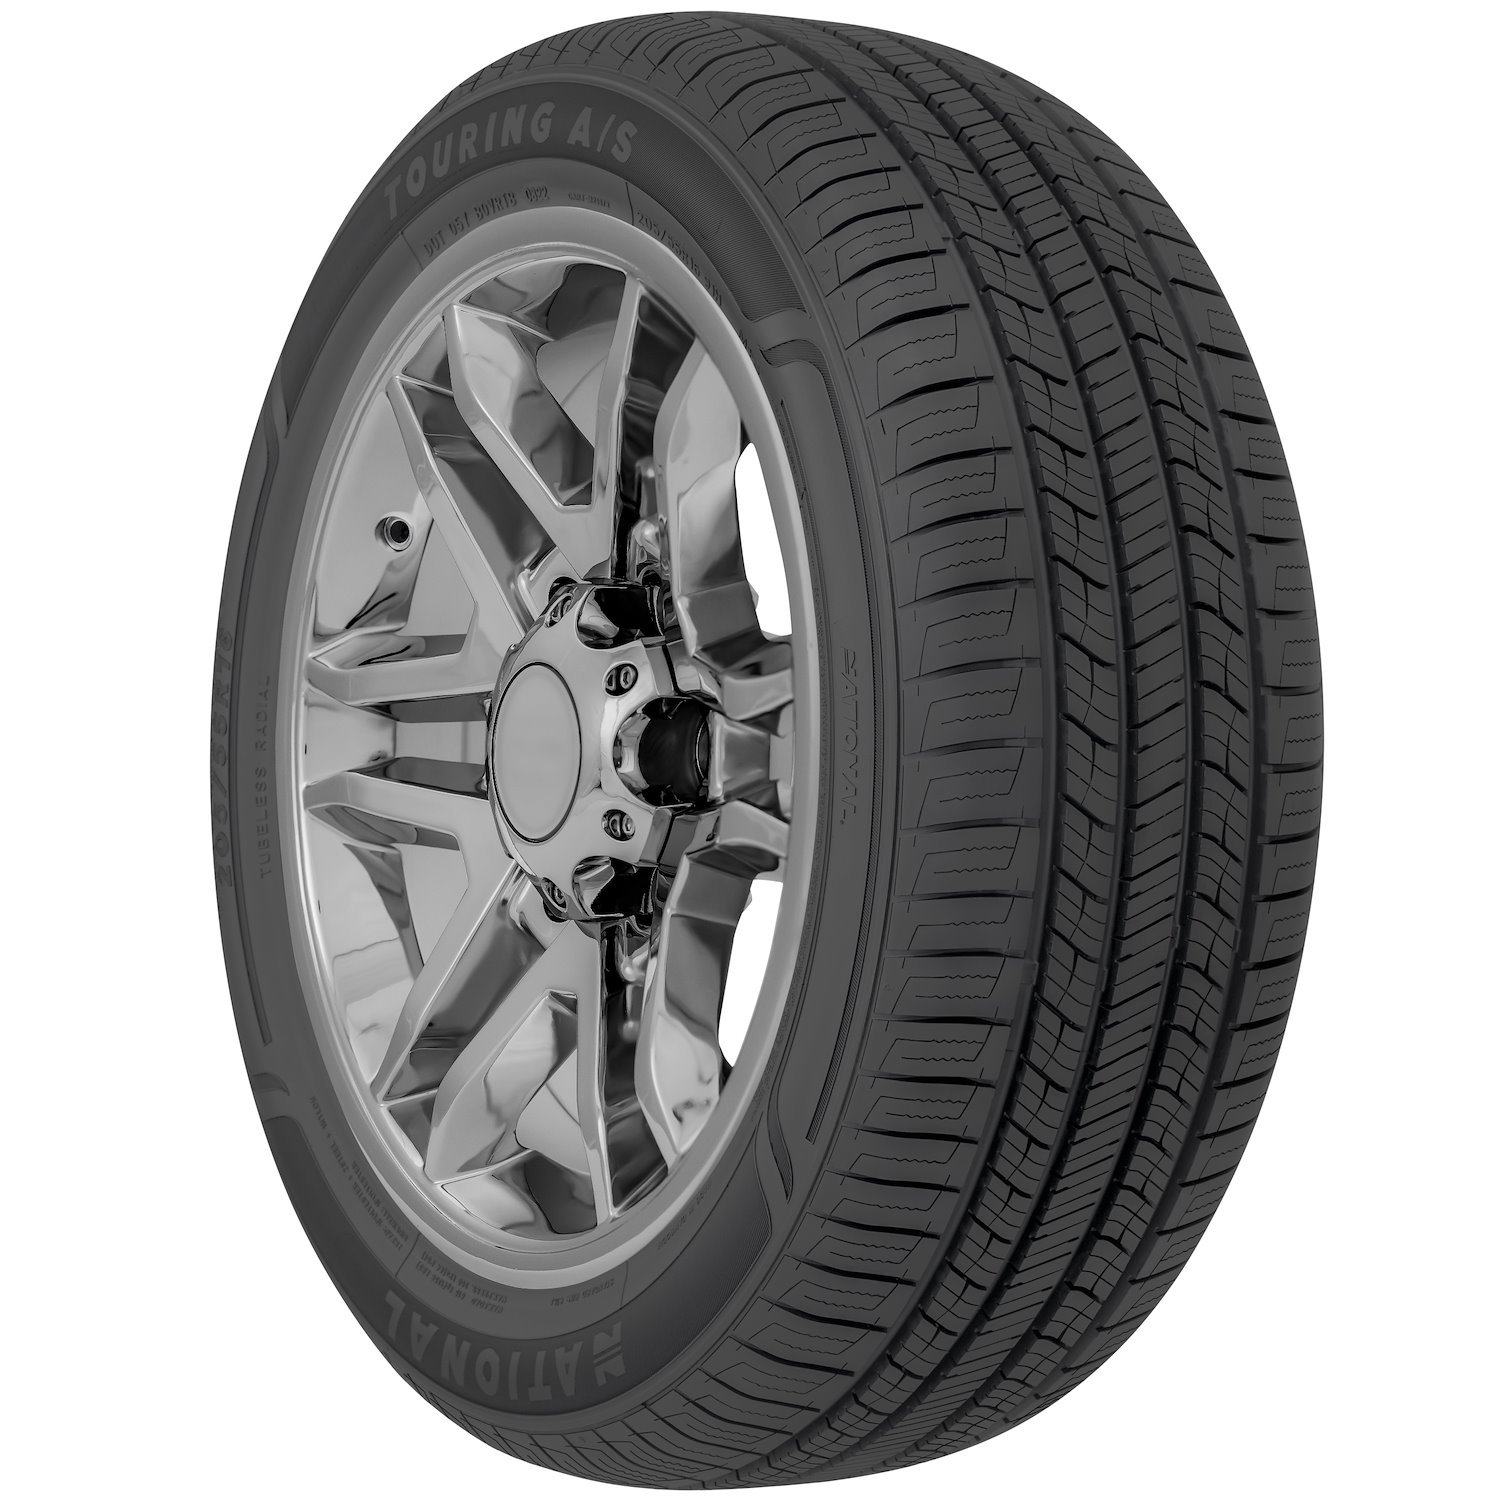 NLR42 Touring A/S Tire, 205/55R16